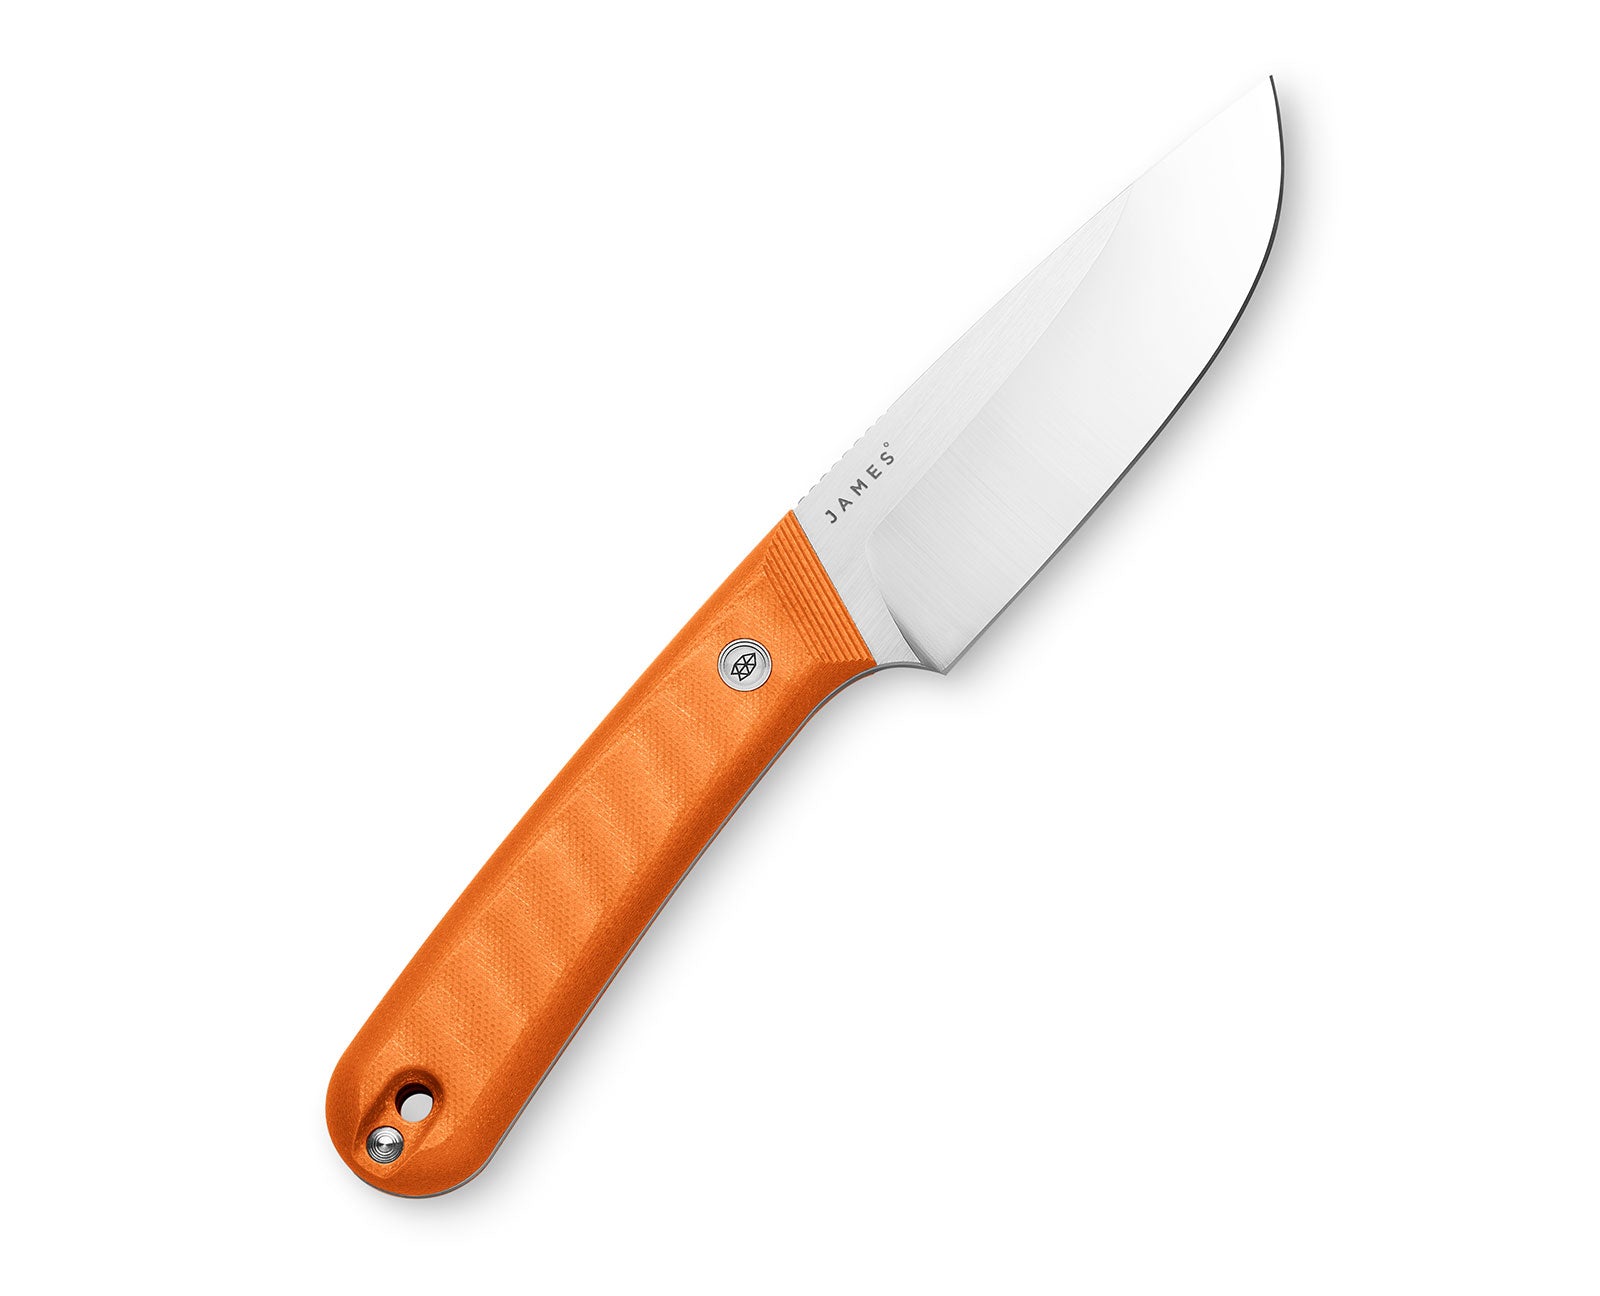 The Hell Gap knife with orange handle and stainless steel blade.